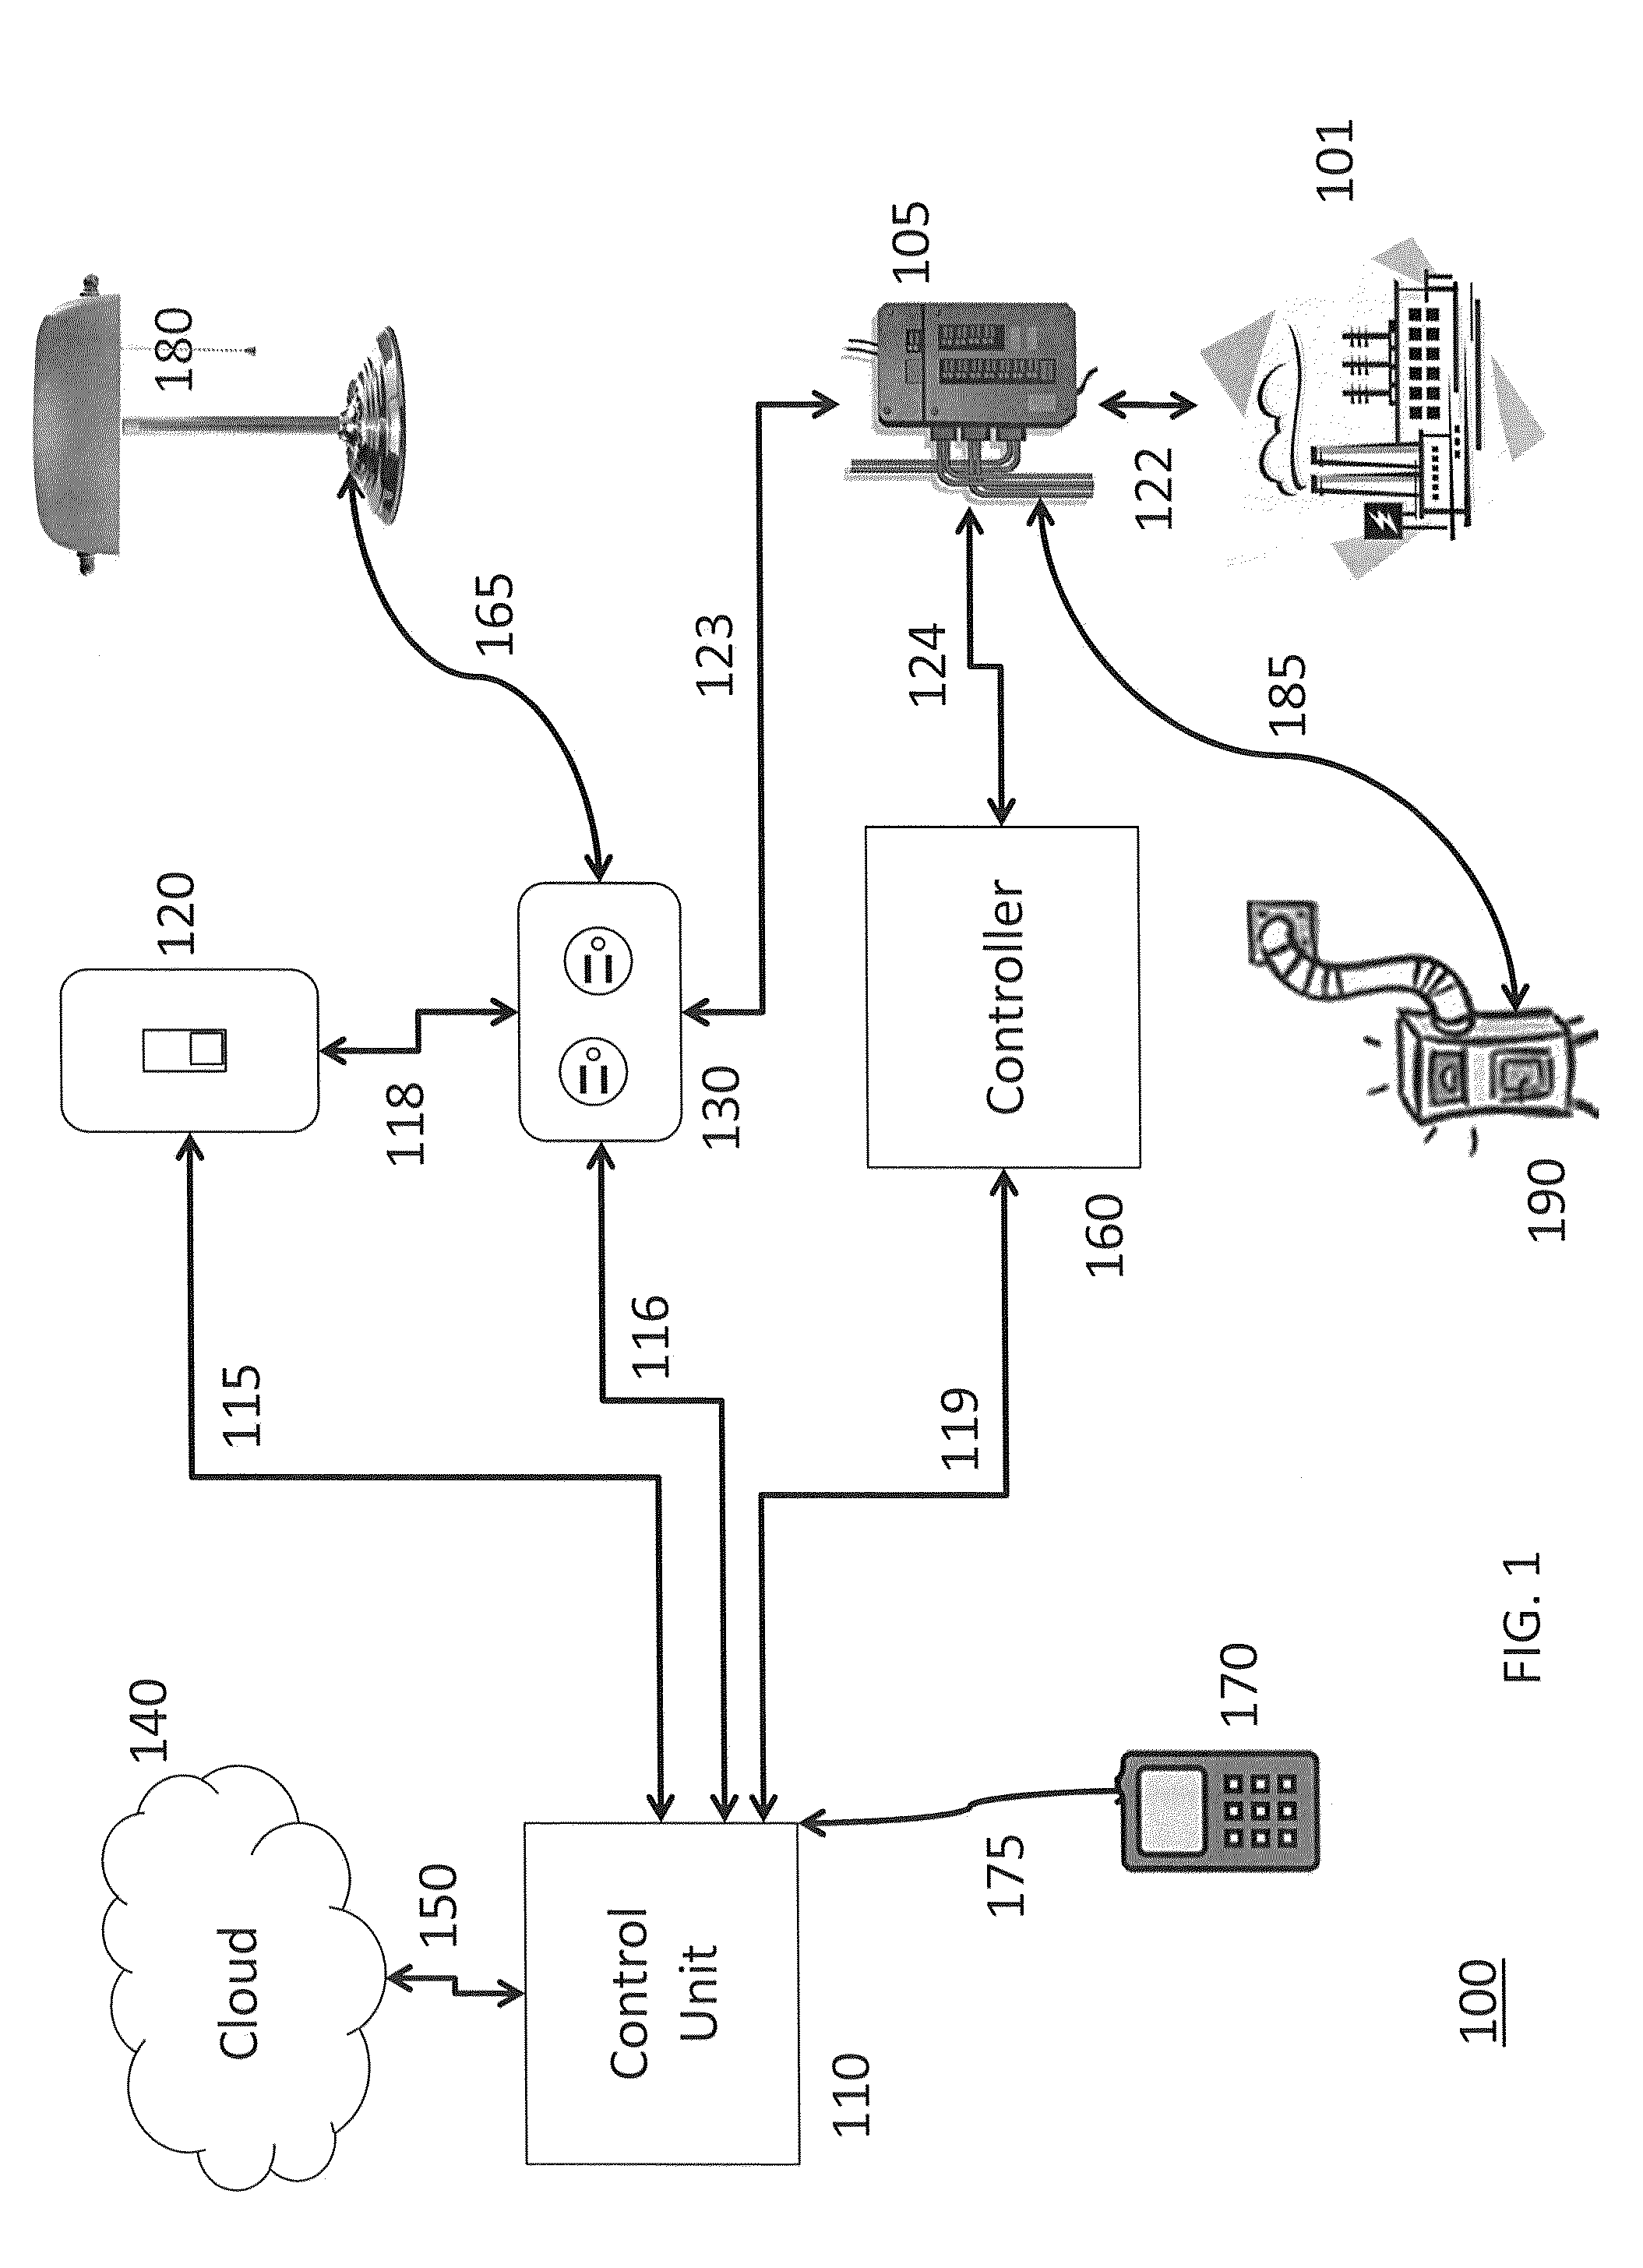 Devices and methods of function-based control in automation systems